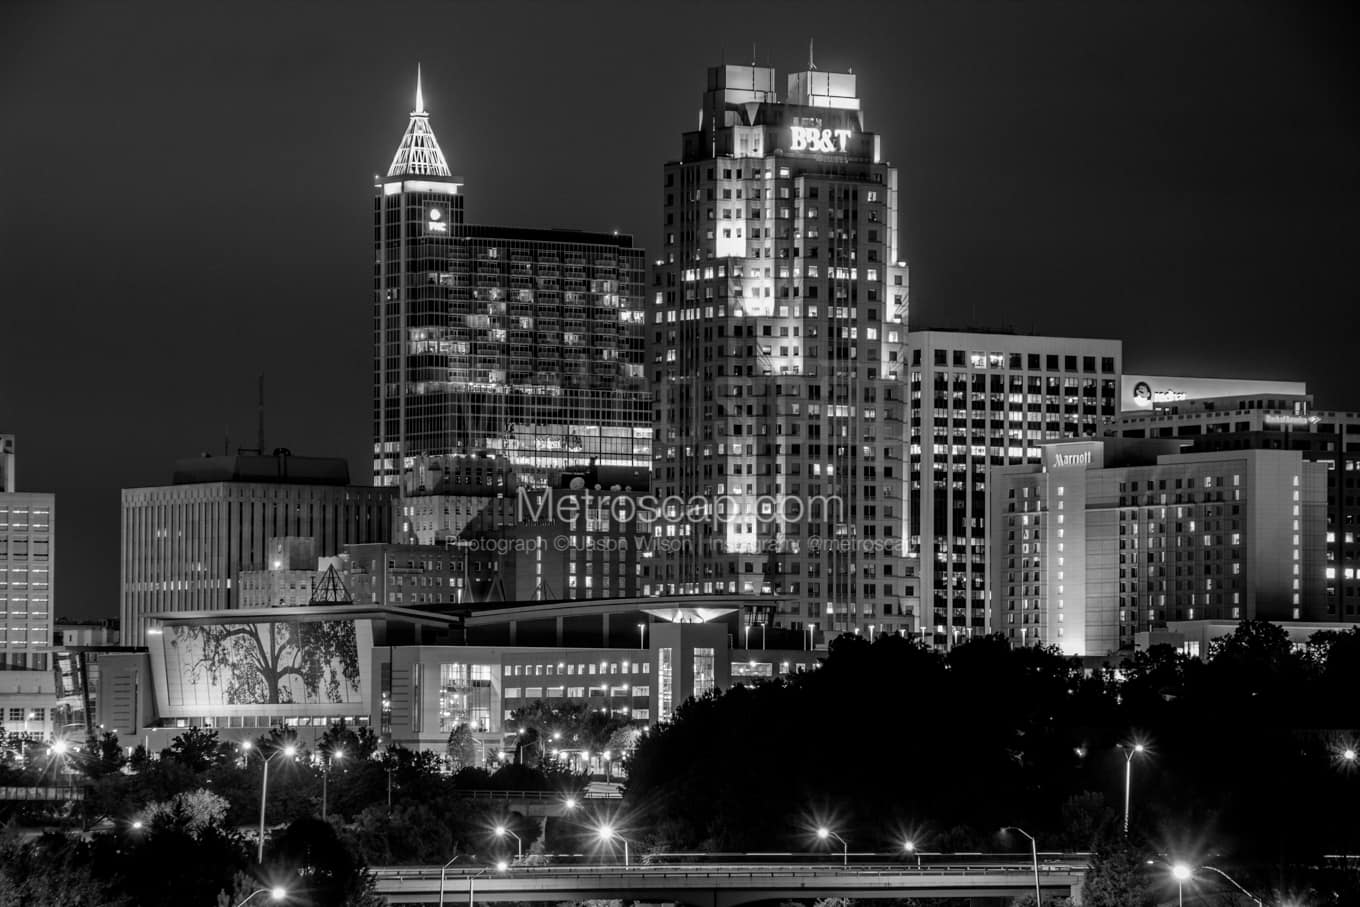 Black & White Raleigh Architecture Pictures